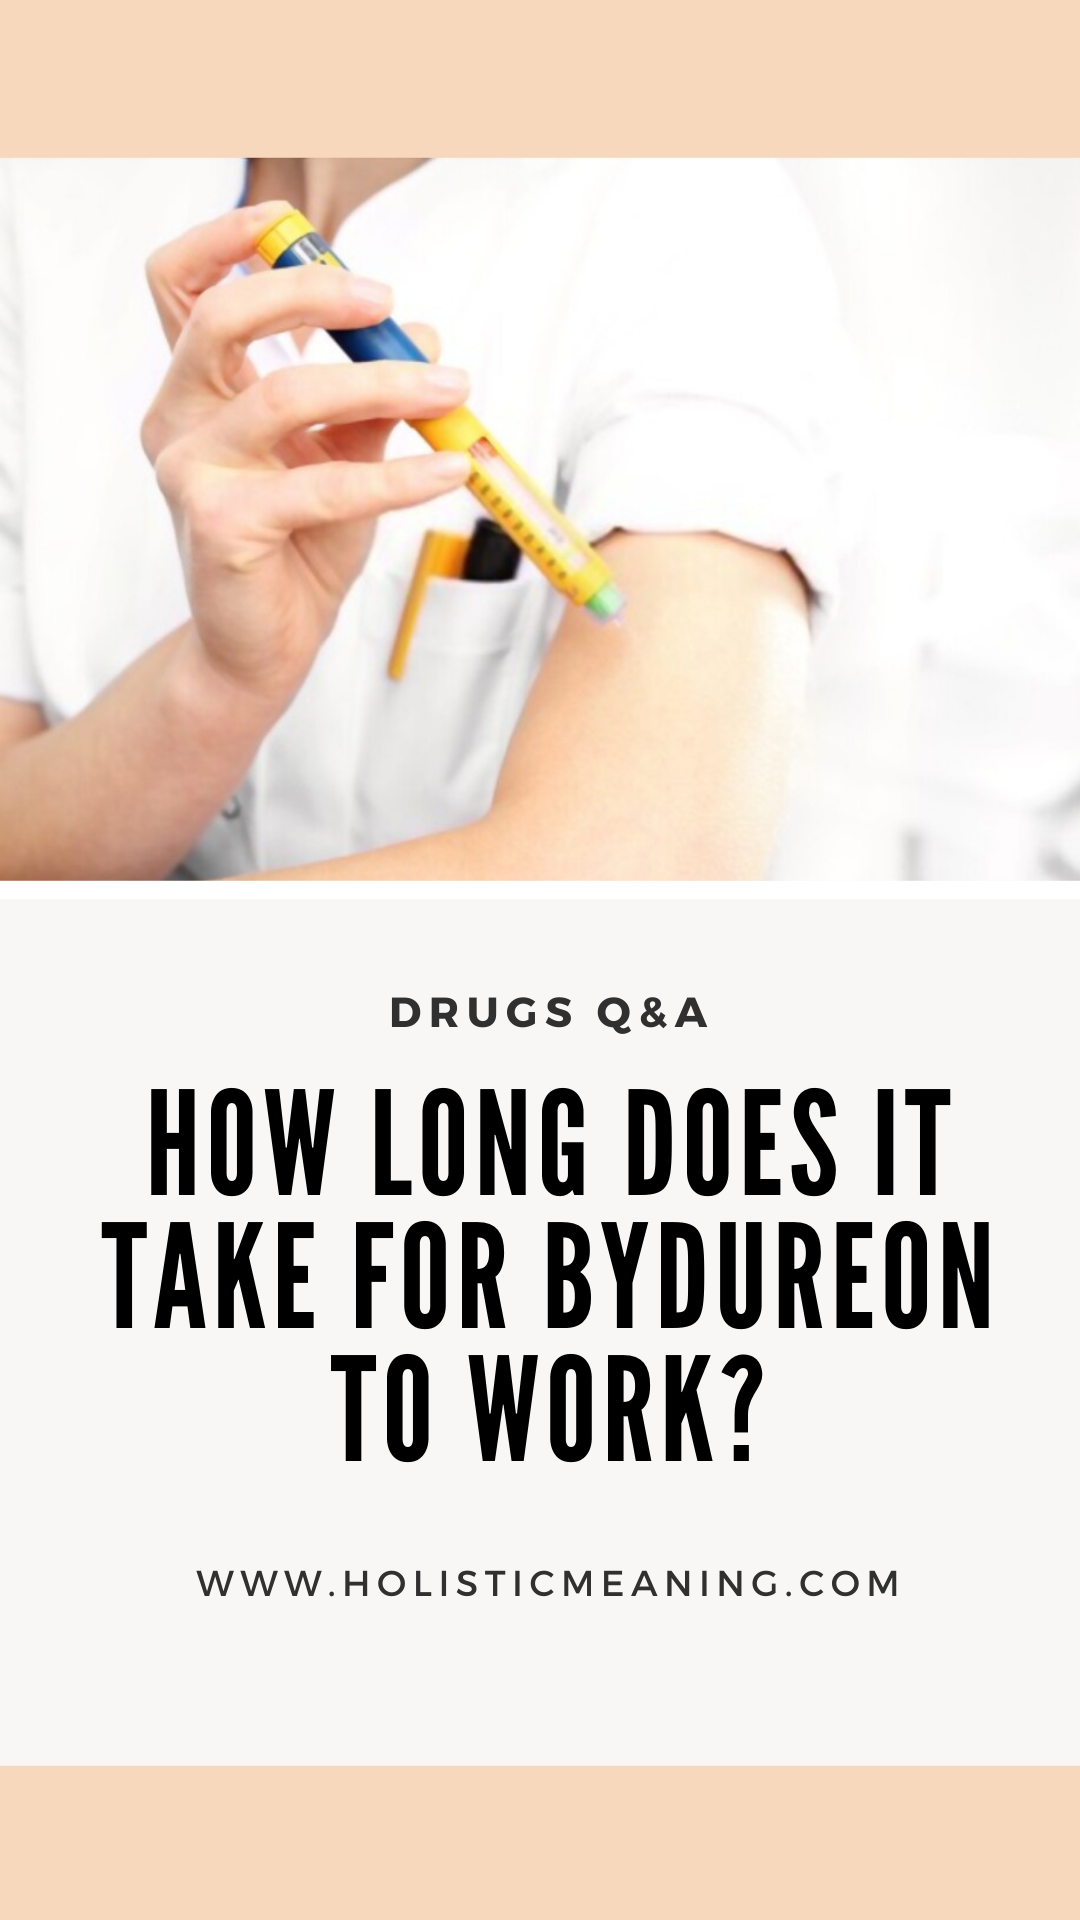 How Long Does It Take For Bydureon To Work?